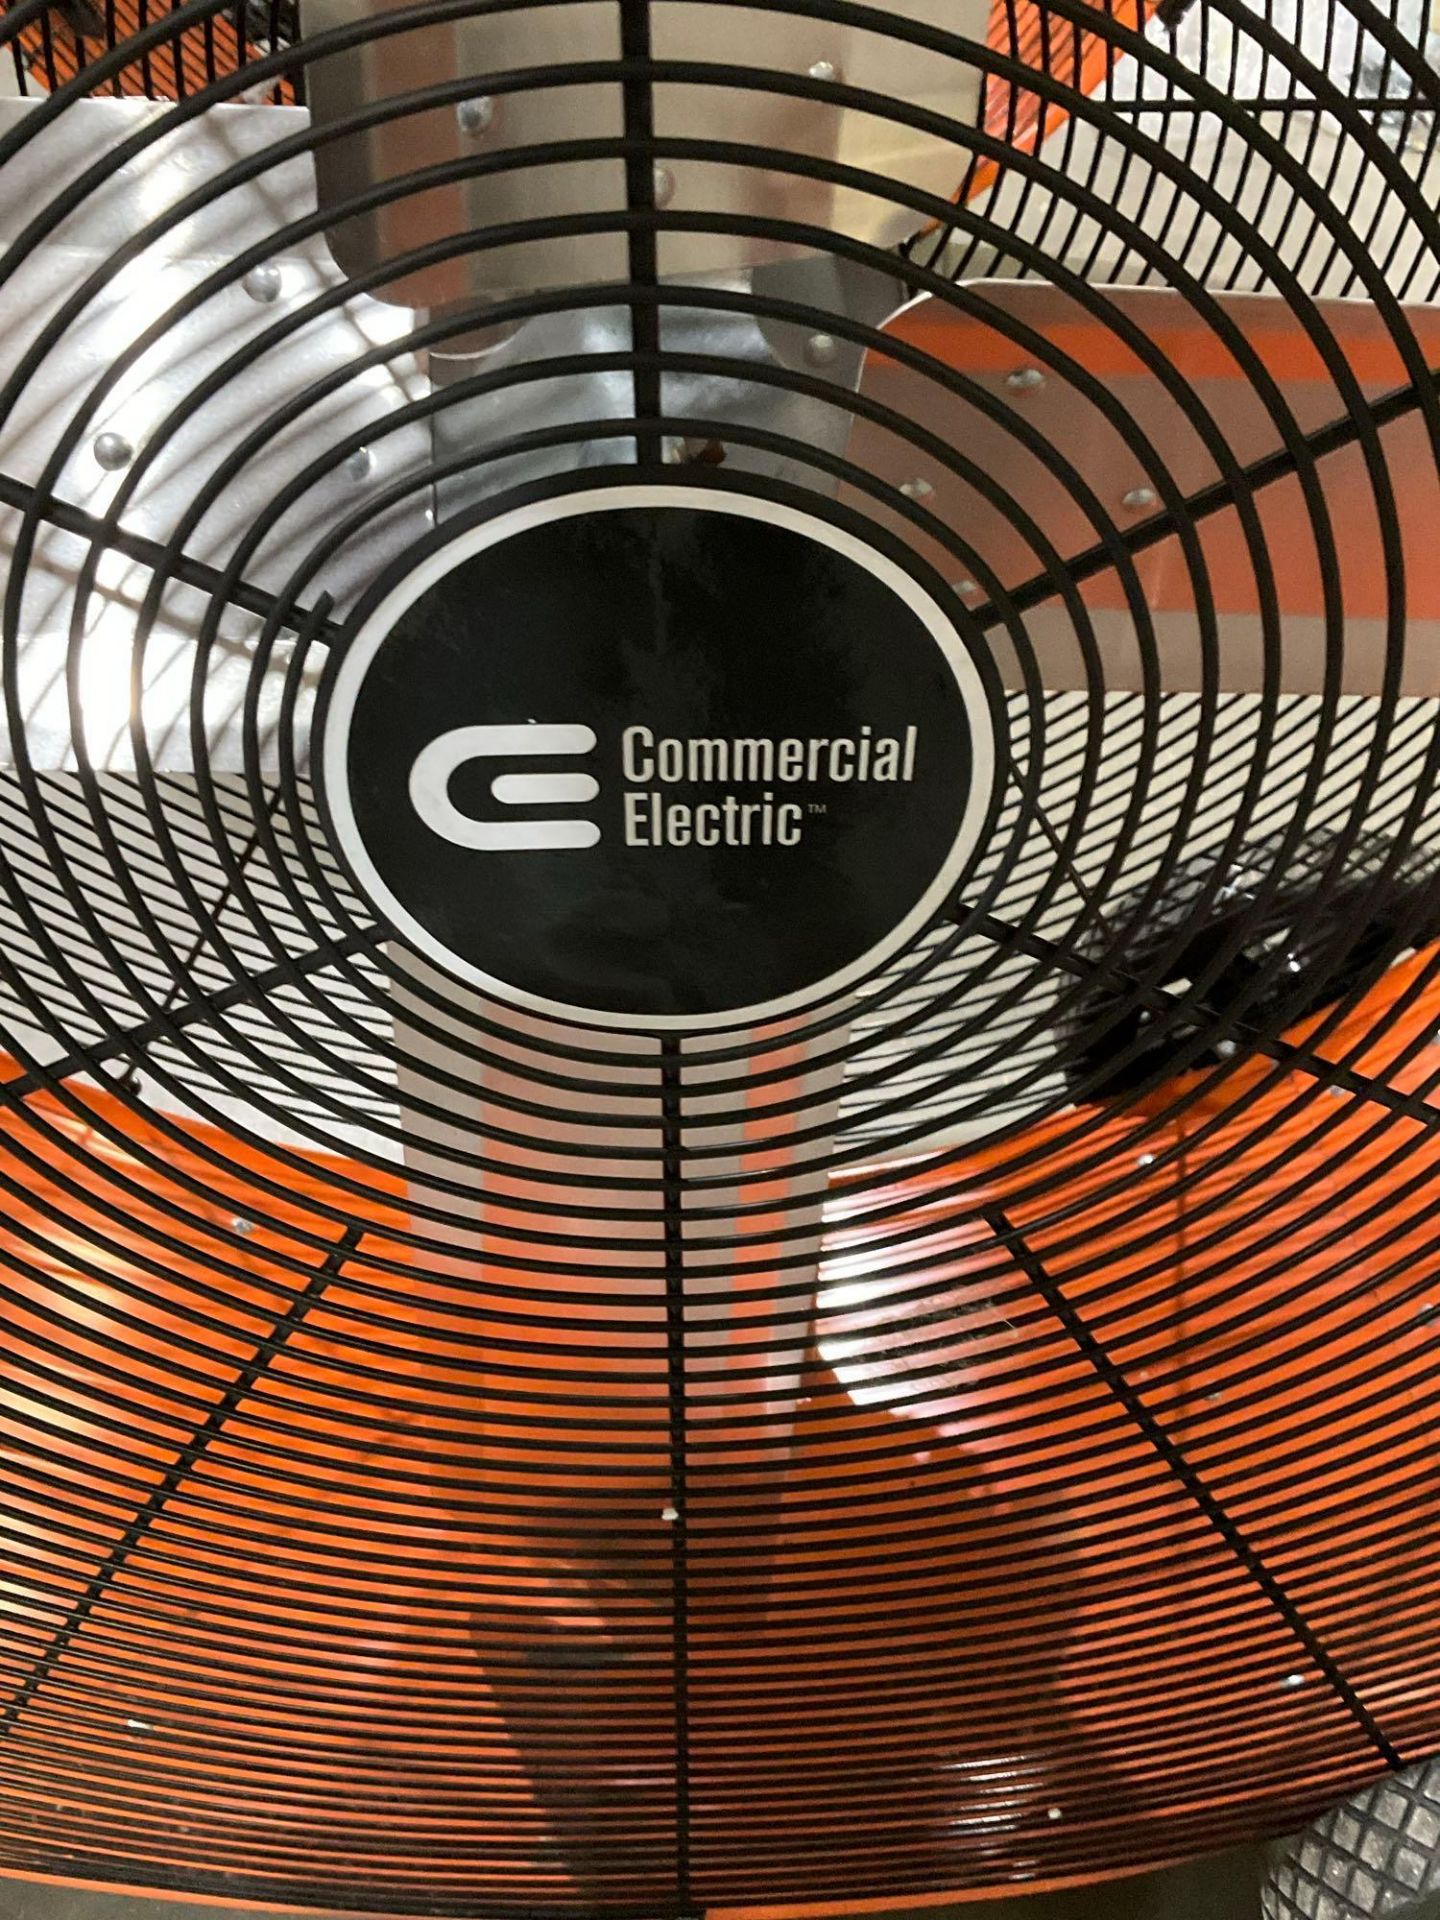 UNUSED 42" COMMERCIAL ELECTRIC PORTABLE BARREL FAN - Image 2 of 7